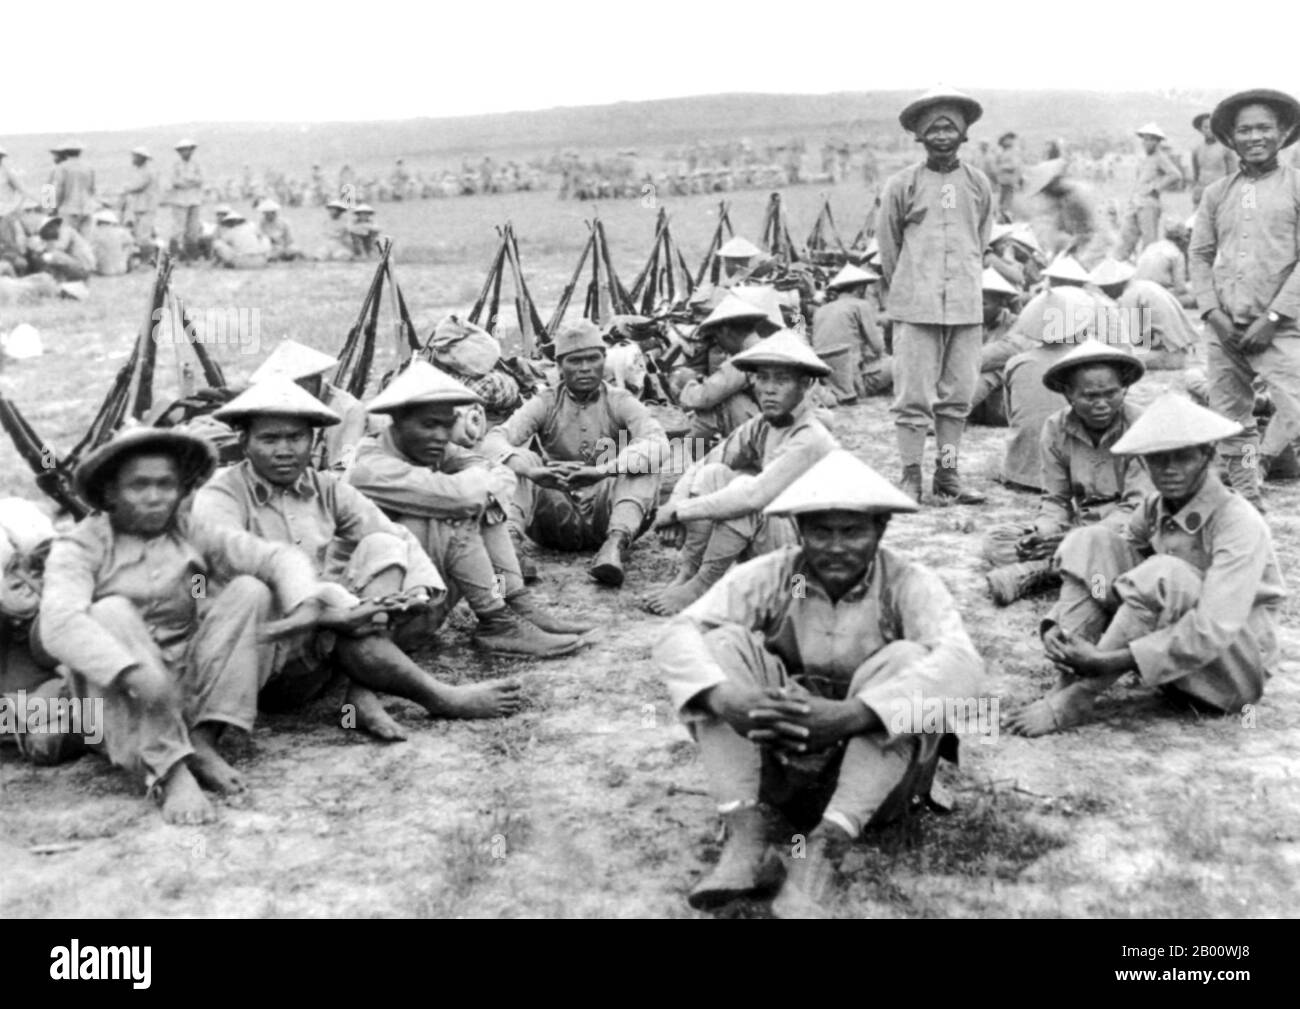 Vietnam: Annamese 'tirailleurs' or Vietnamese colonial soldiers waiting to go into battle at Ypres, Belgium, in 1916.  Ypres occupied a strategic position during World War I because it stood in the path of Germany's planned sweep across the rest of Belgium and into France. In the Second Battle of Ypres (22 April to 25 May 1915), the Germans used poison gas for the first time on the Western Front (they had used it earlier at the Battle of Bolimov on 3 January 1915) and captured high ground east of the town. The first gas attack occurred against Canadian, British, and French soldiers. Stock Photo